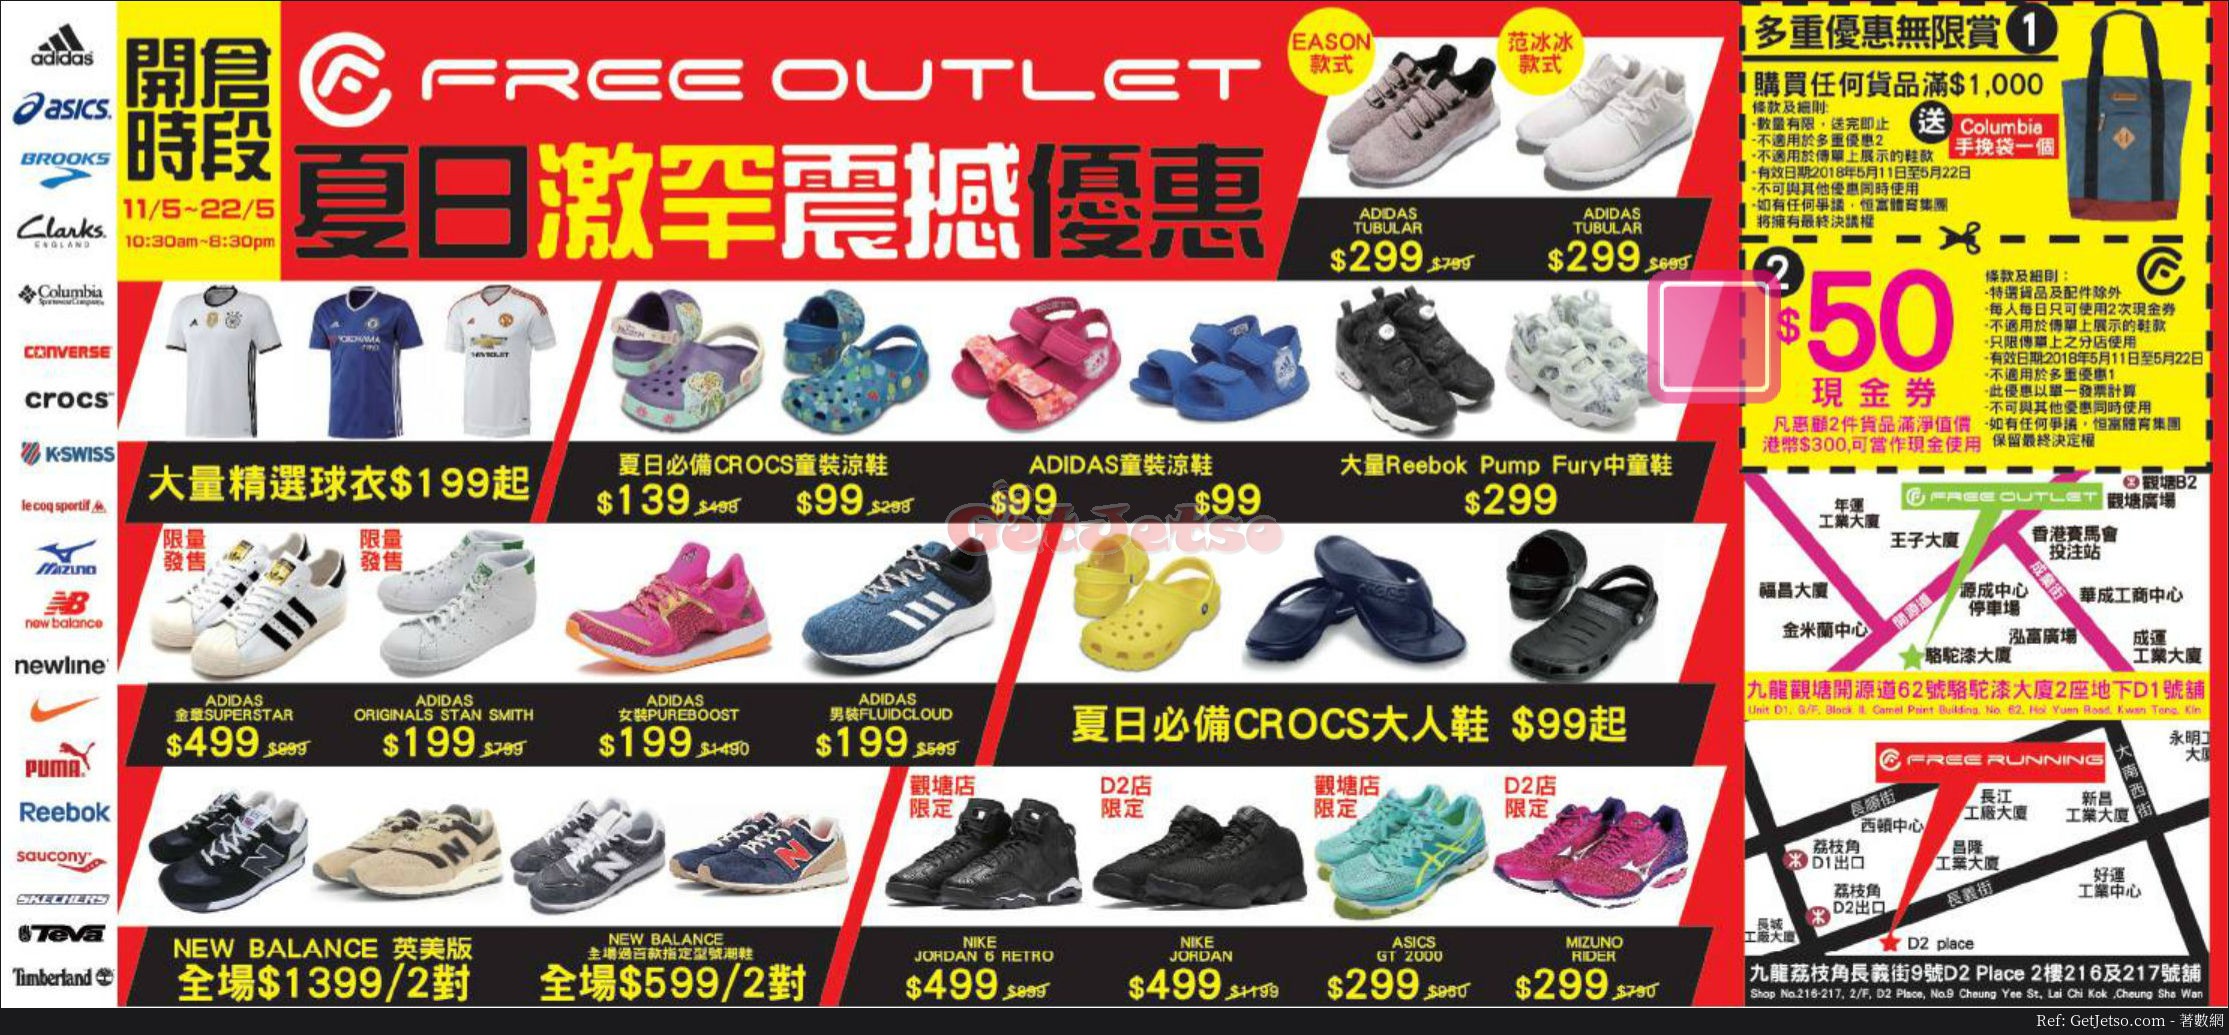 Free Outlet 球衣波鞋低至開倉優惠(18年5月11-22日)圖片1